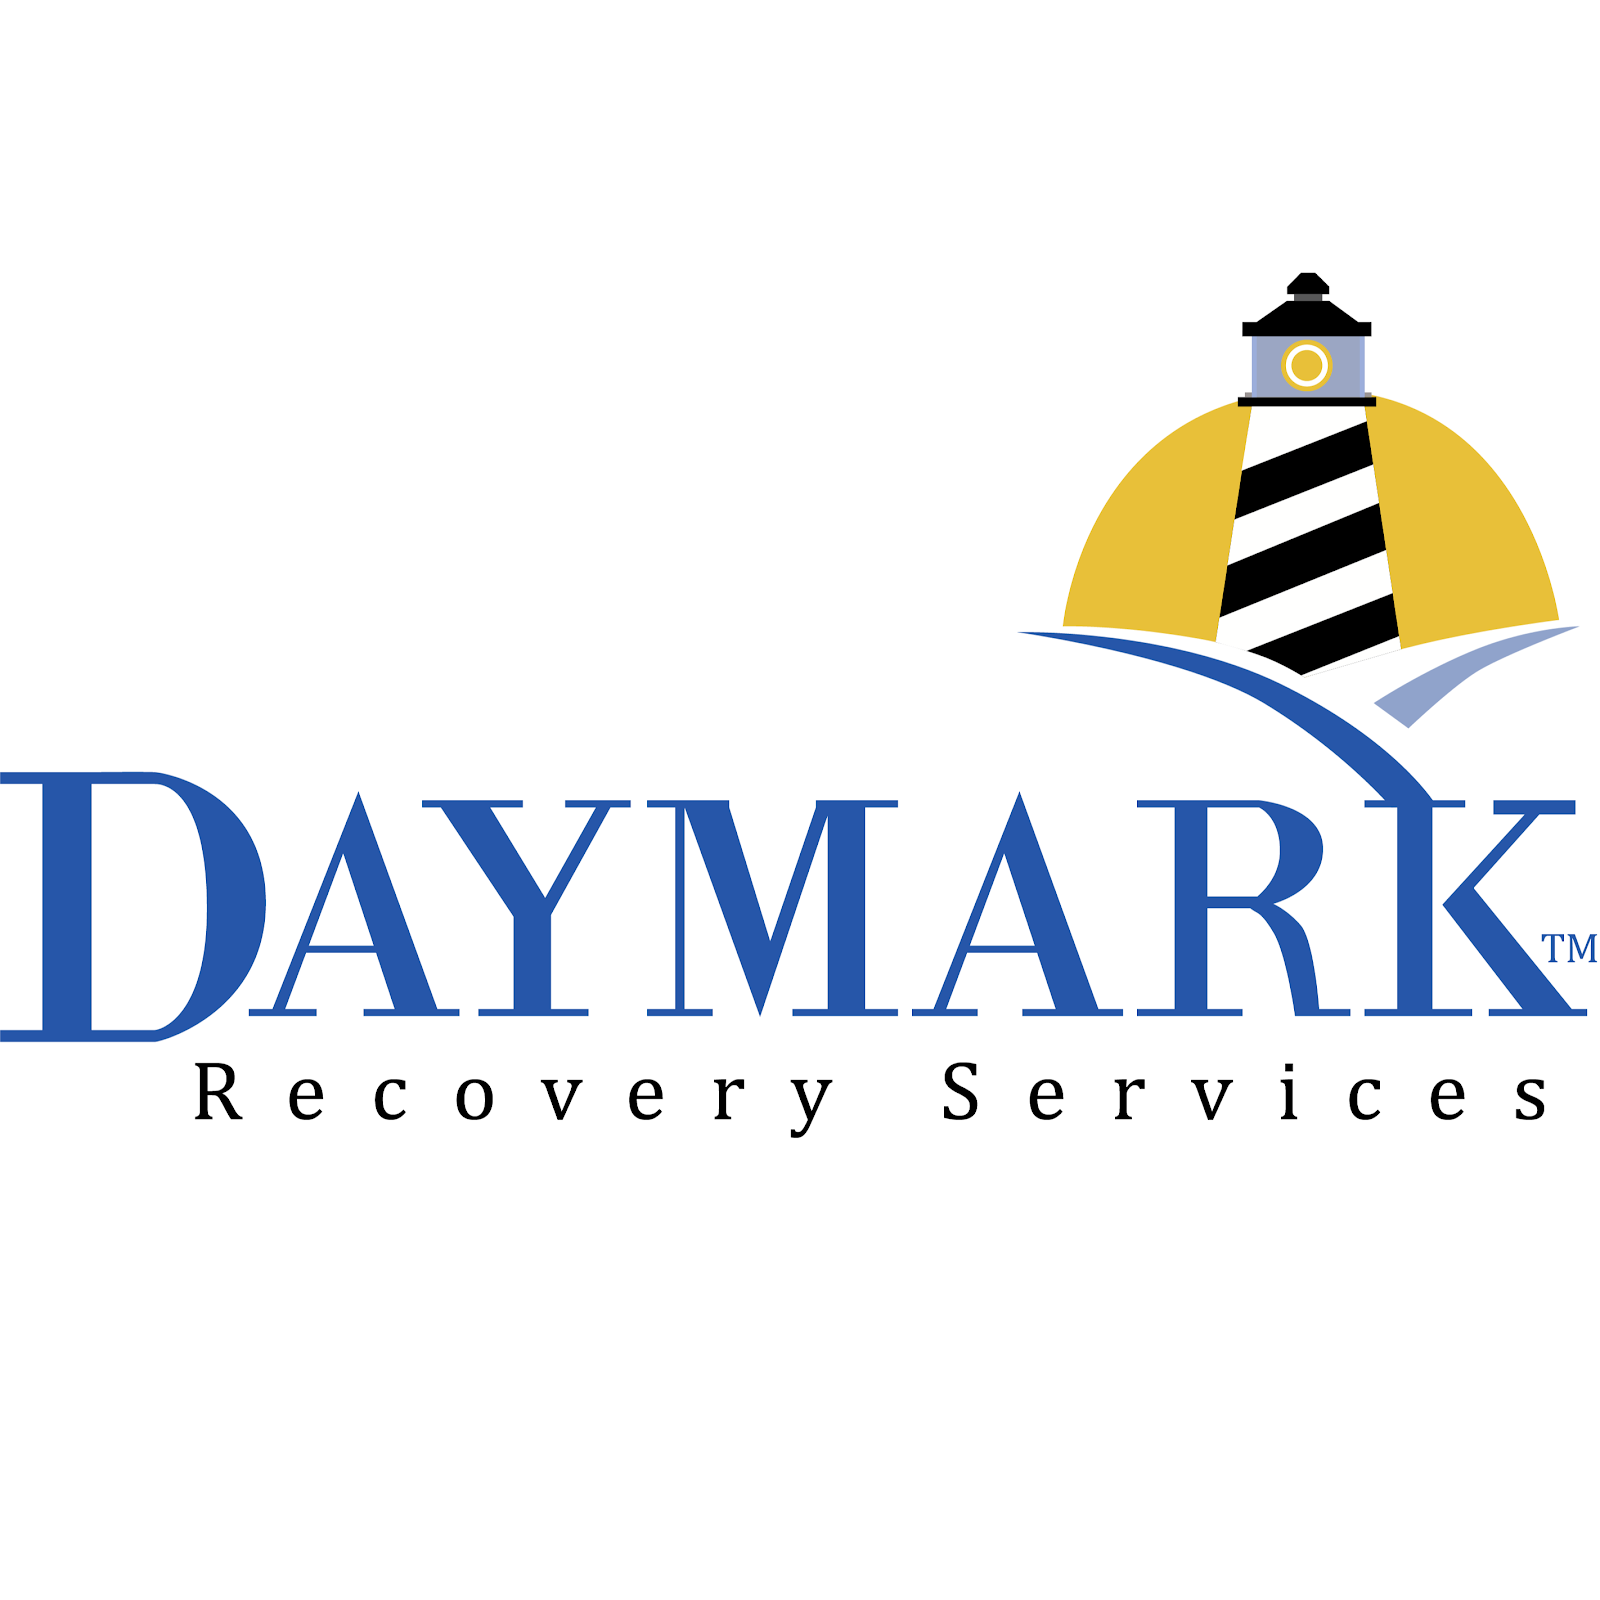 Daymark Recovery Services 940 West Lebanon Street